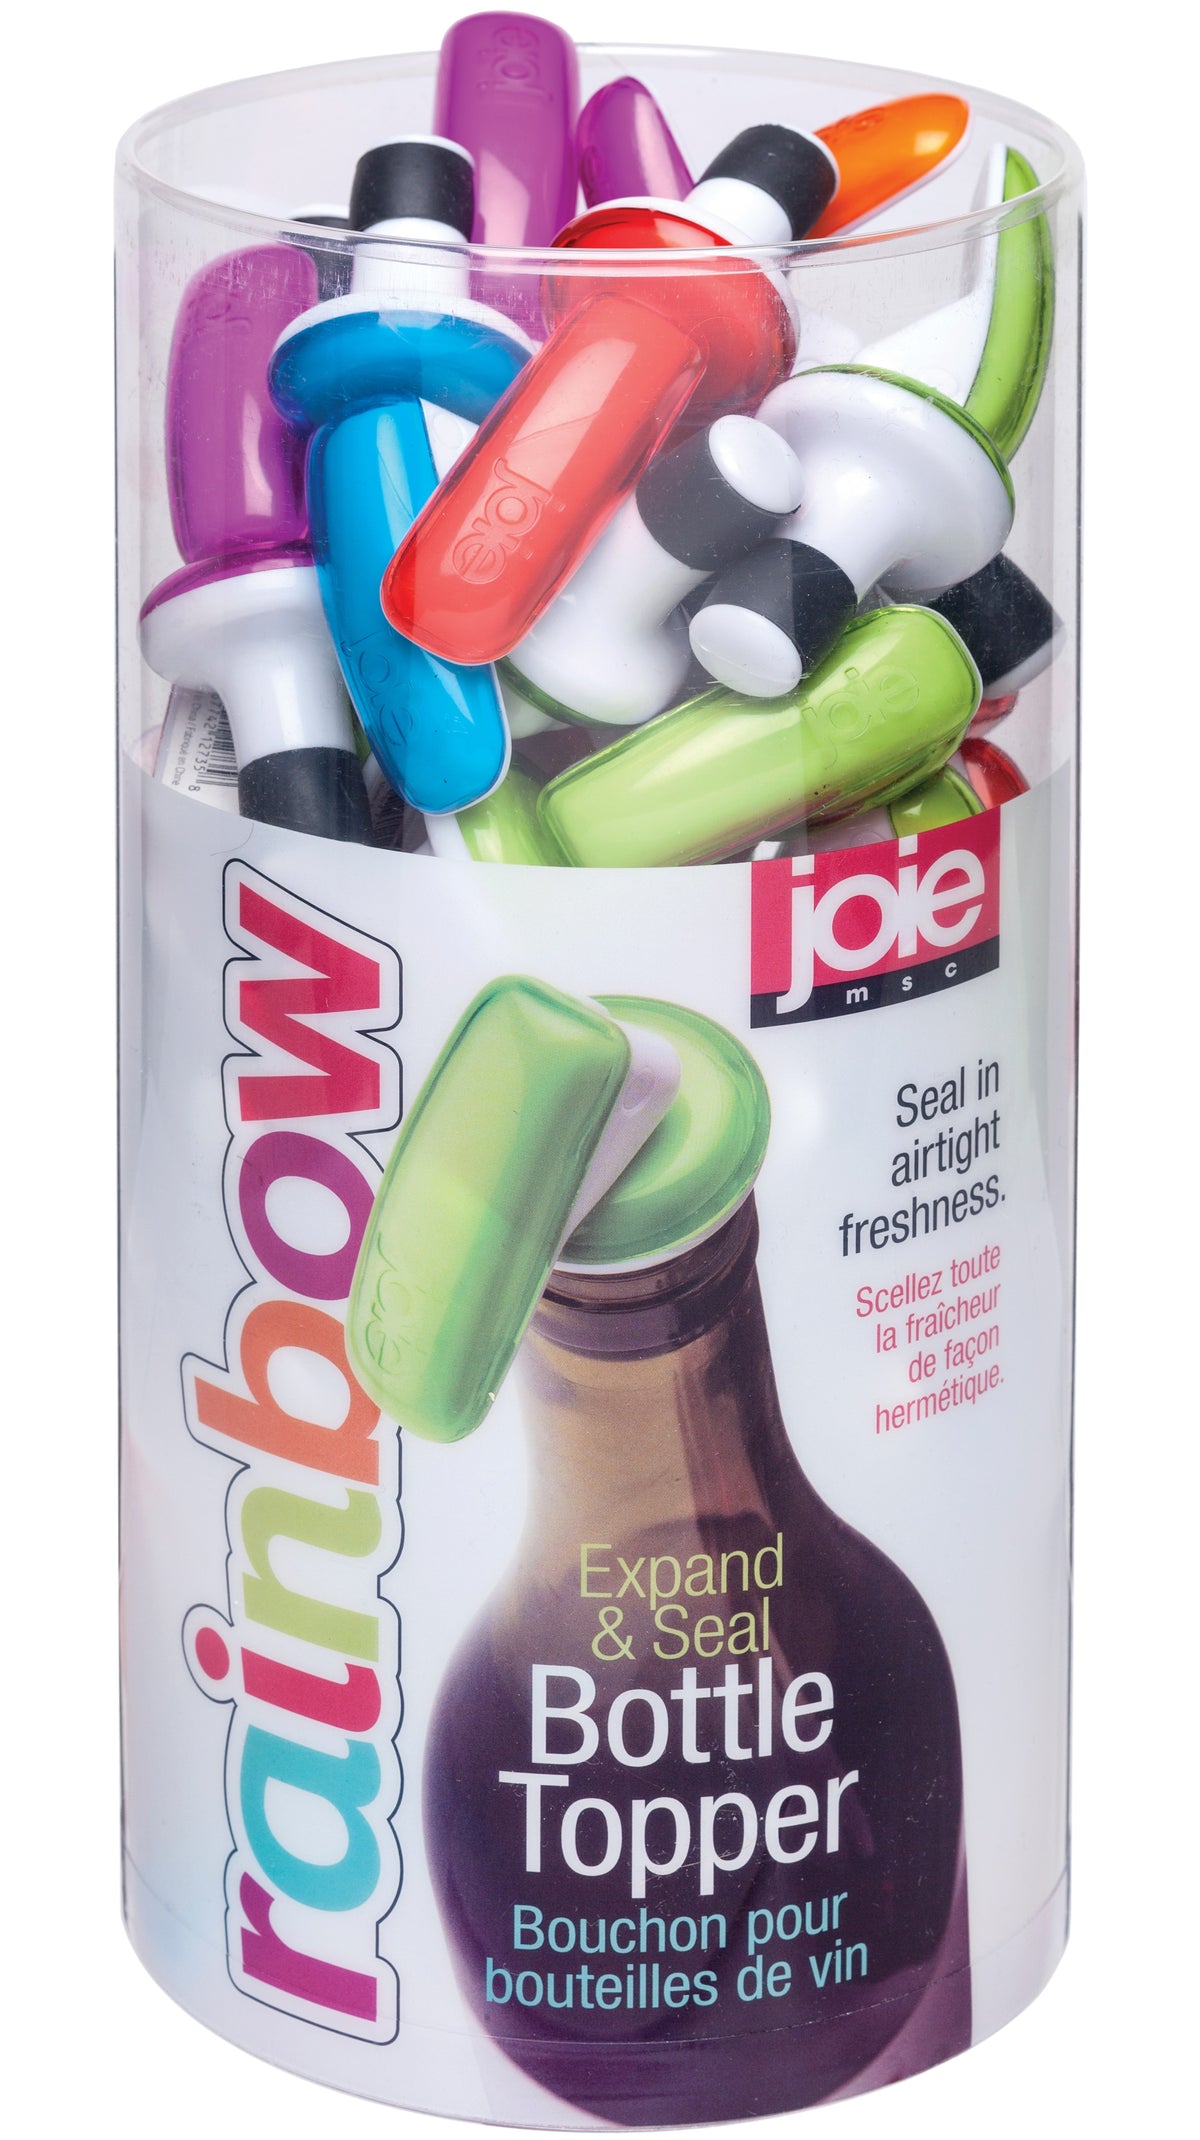 Joie MSC 12735PRO Rainbow Expand & Seal Bottle Topper, Assorted Colors